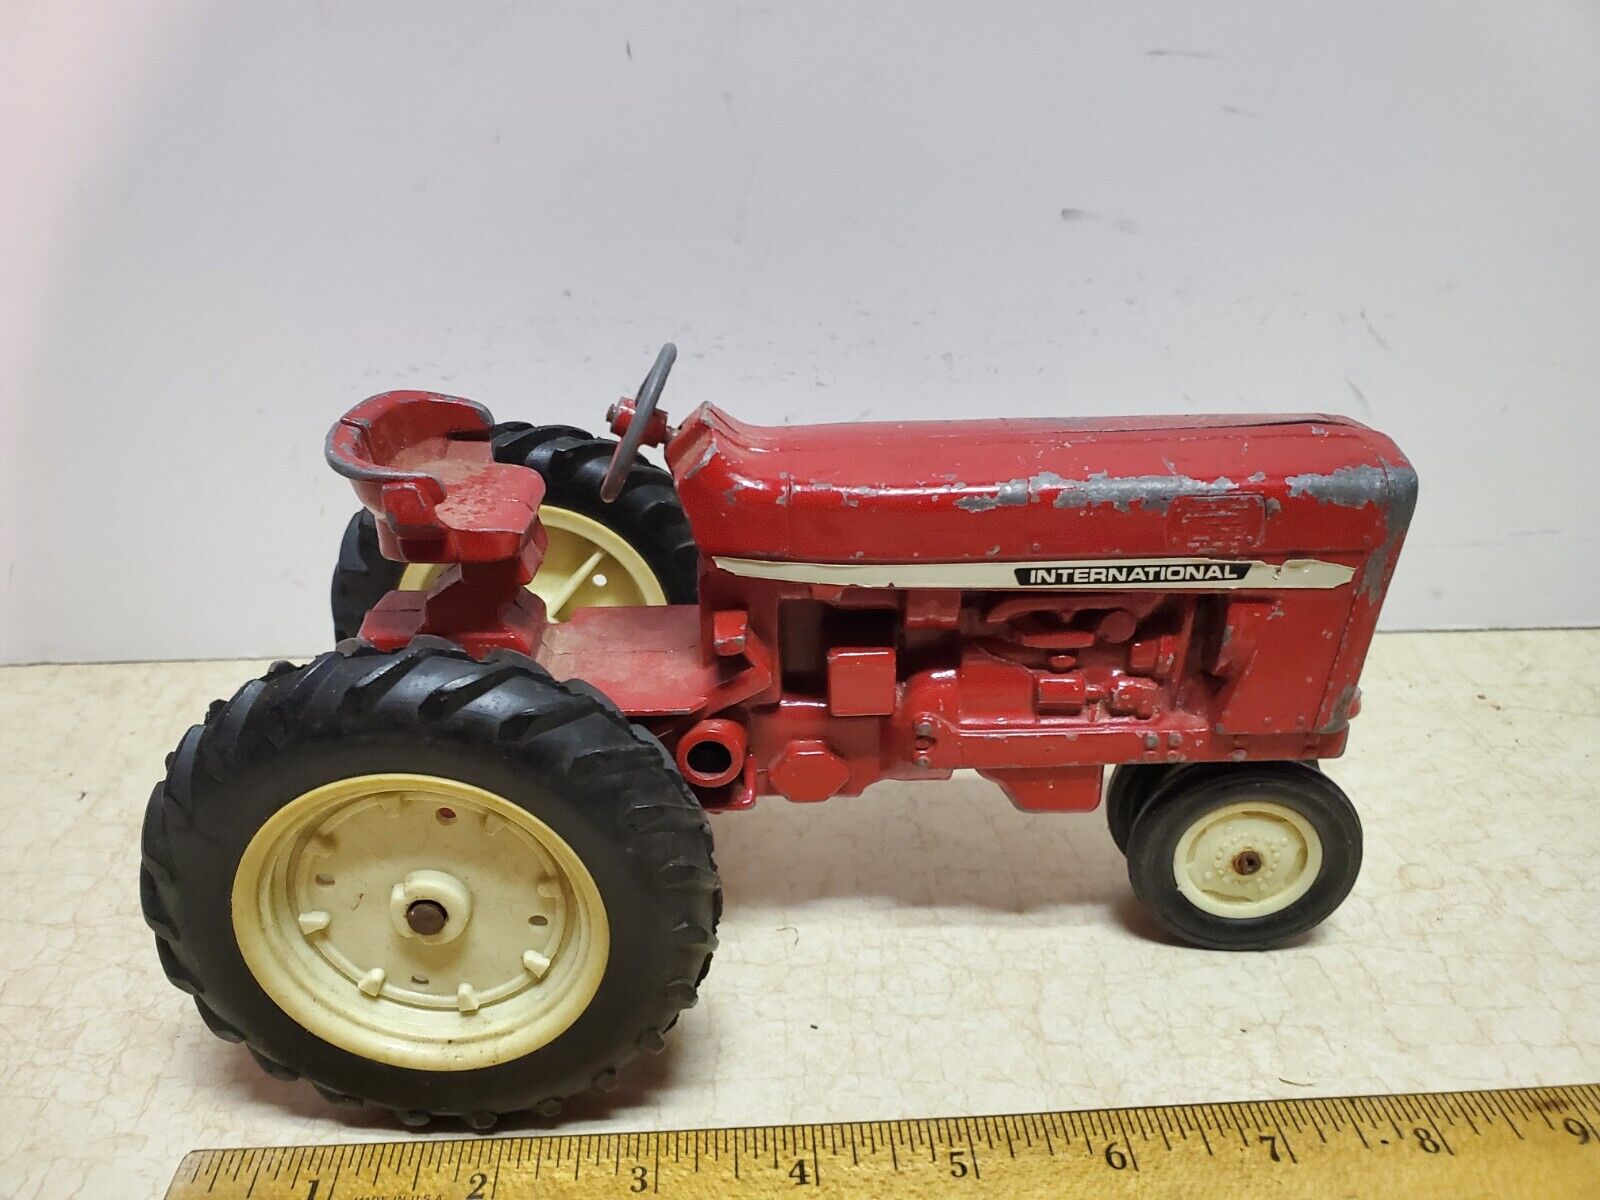 Toy /16 Scale - Ertl  International Harvester 544 Tractor # 2